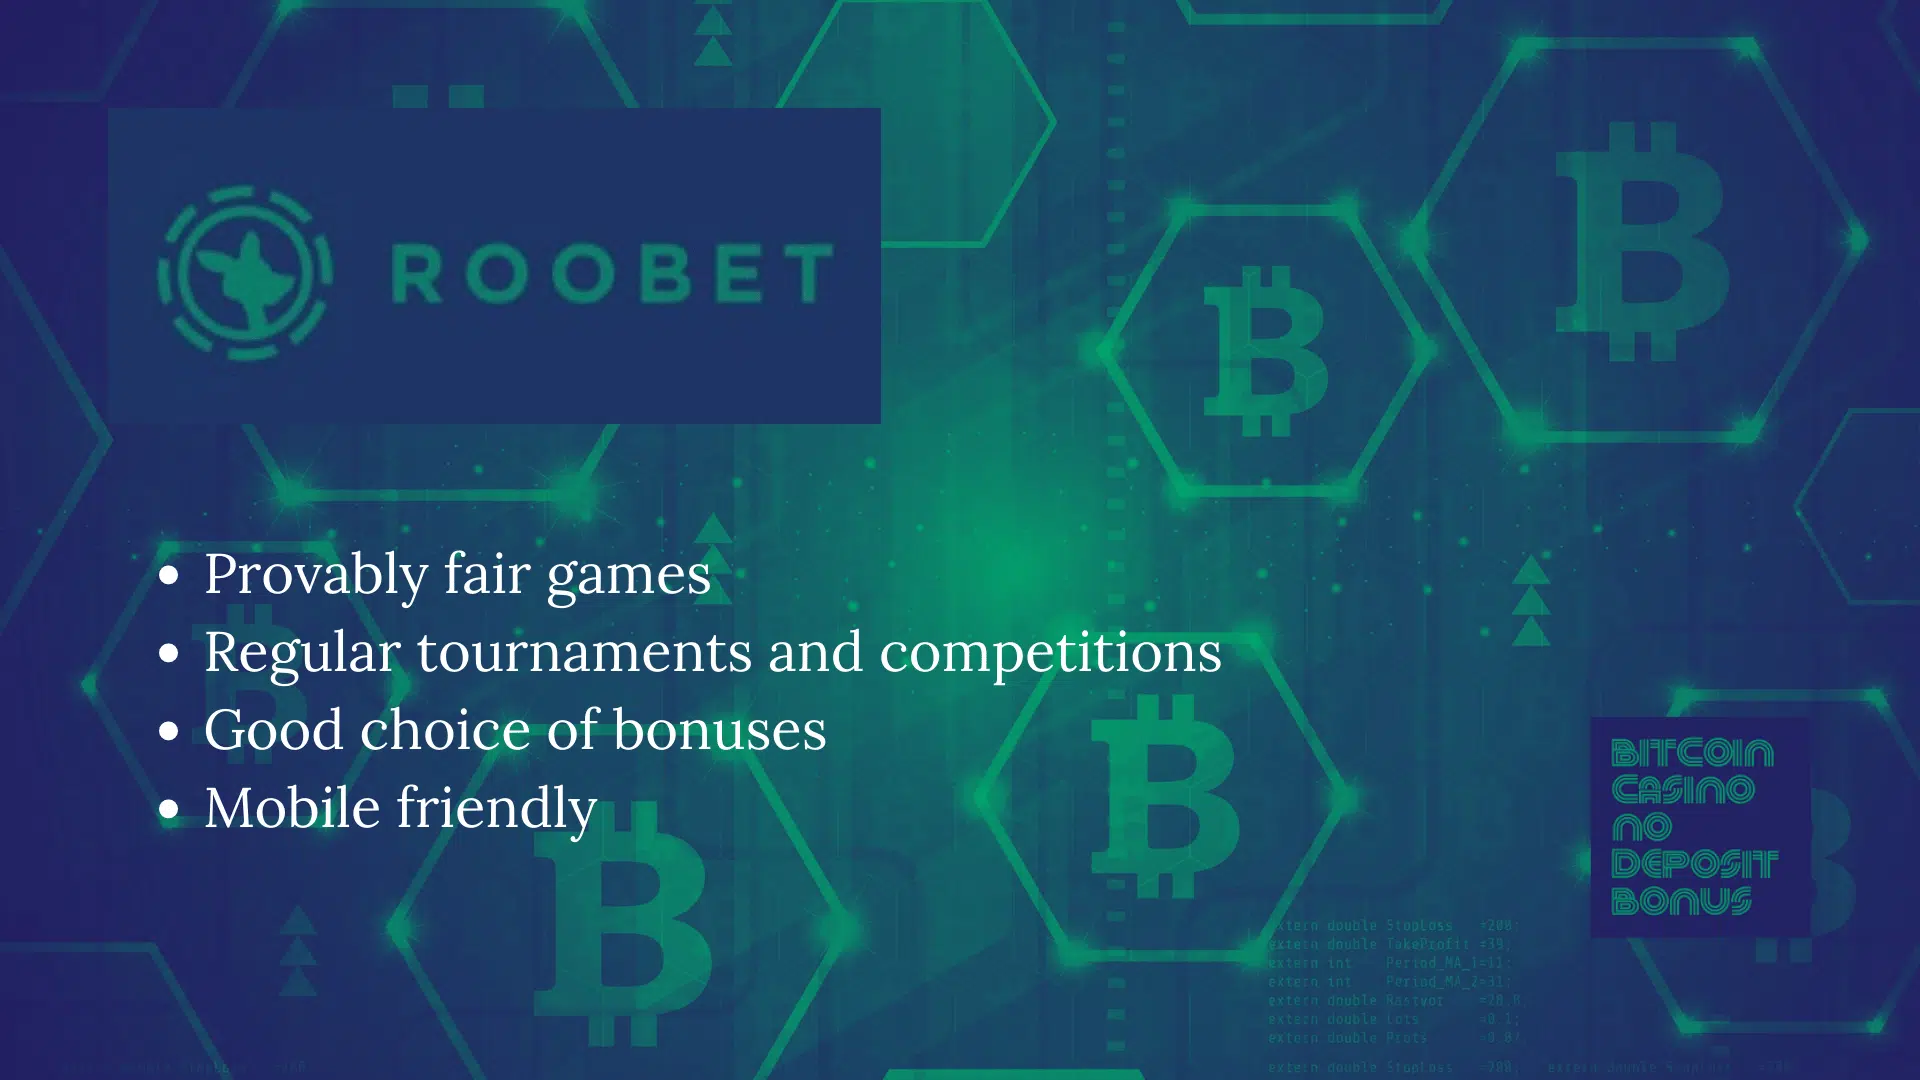 You are currently viewing Roobet Casino Bonus Codes – Roobet.com Free Spins December 2022